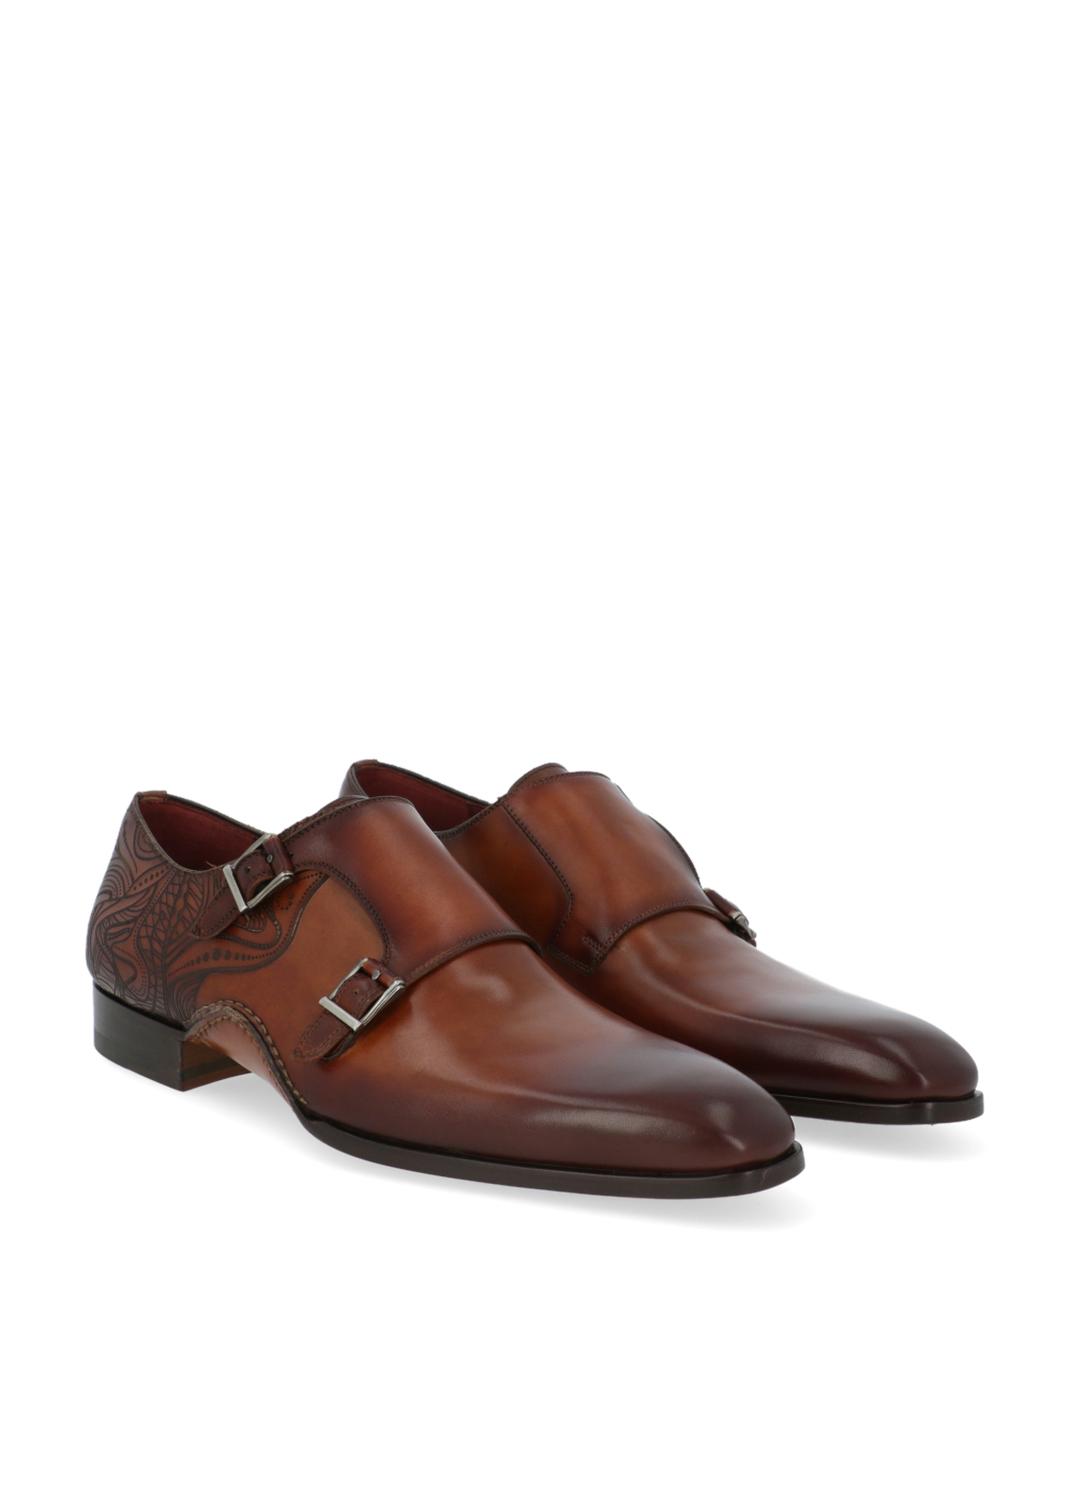 Magnanni Sneakers MGN-25701